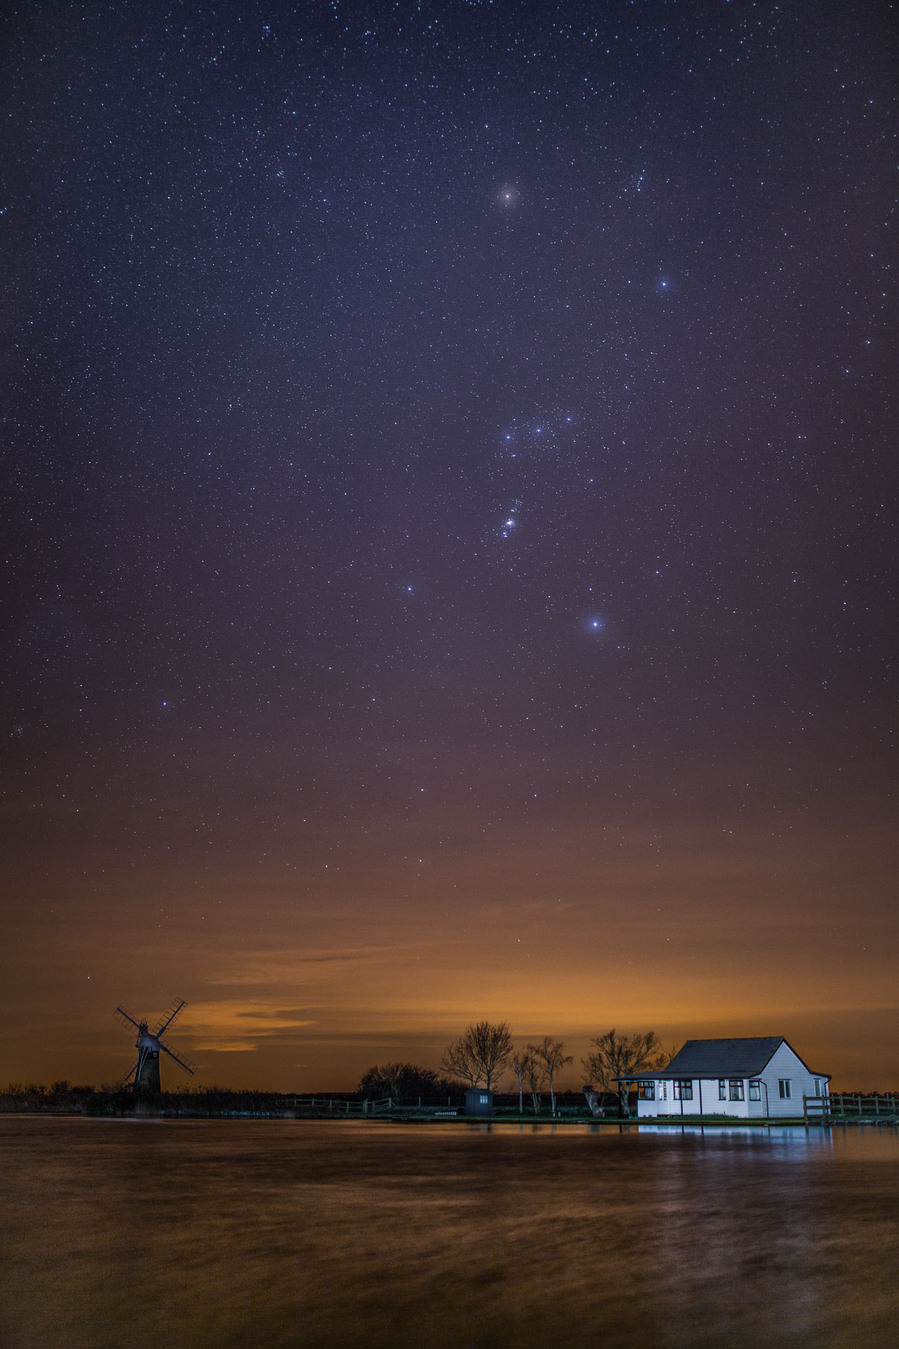 Thurne mill with st Bennets drainage mill and a white riverside house and the Orion star constellation above it with a glow from the nearby light pollution in the sky and also on the river Thurne that is part of the Norfolk broads national park